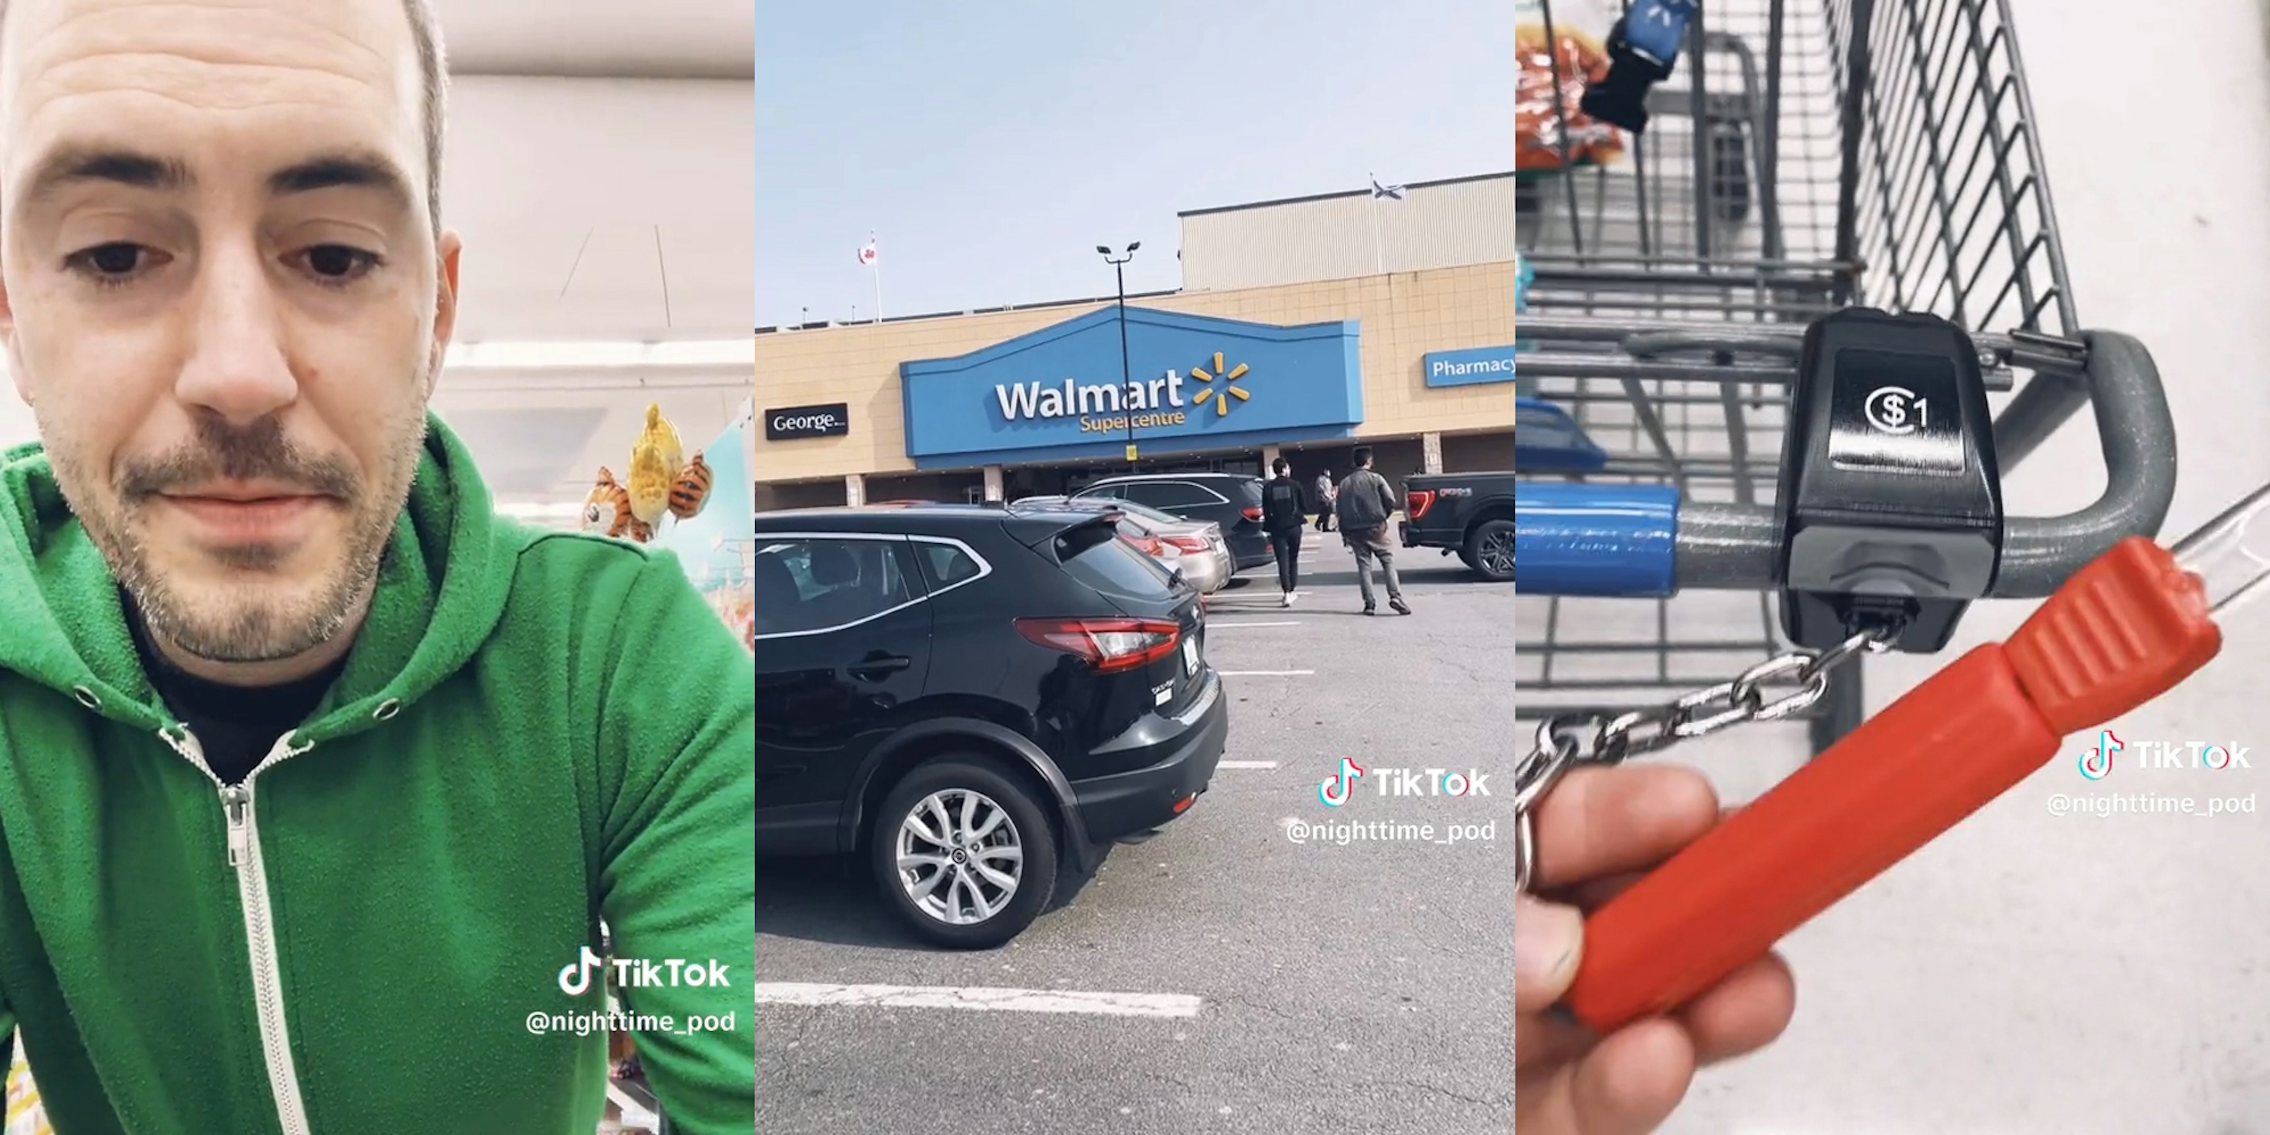 man confused and upset by cart deposit device at Walmart